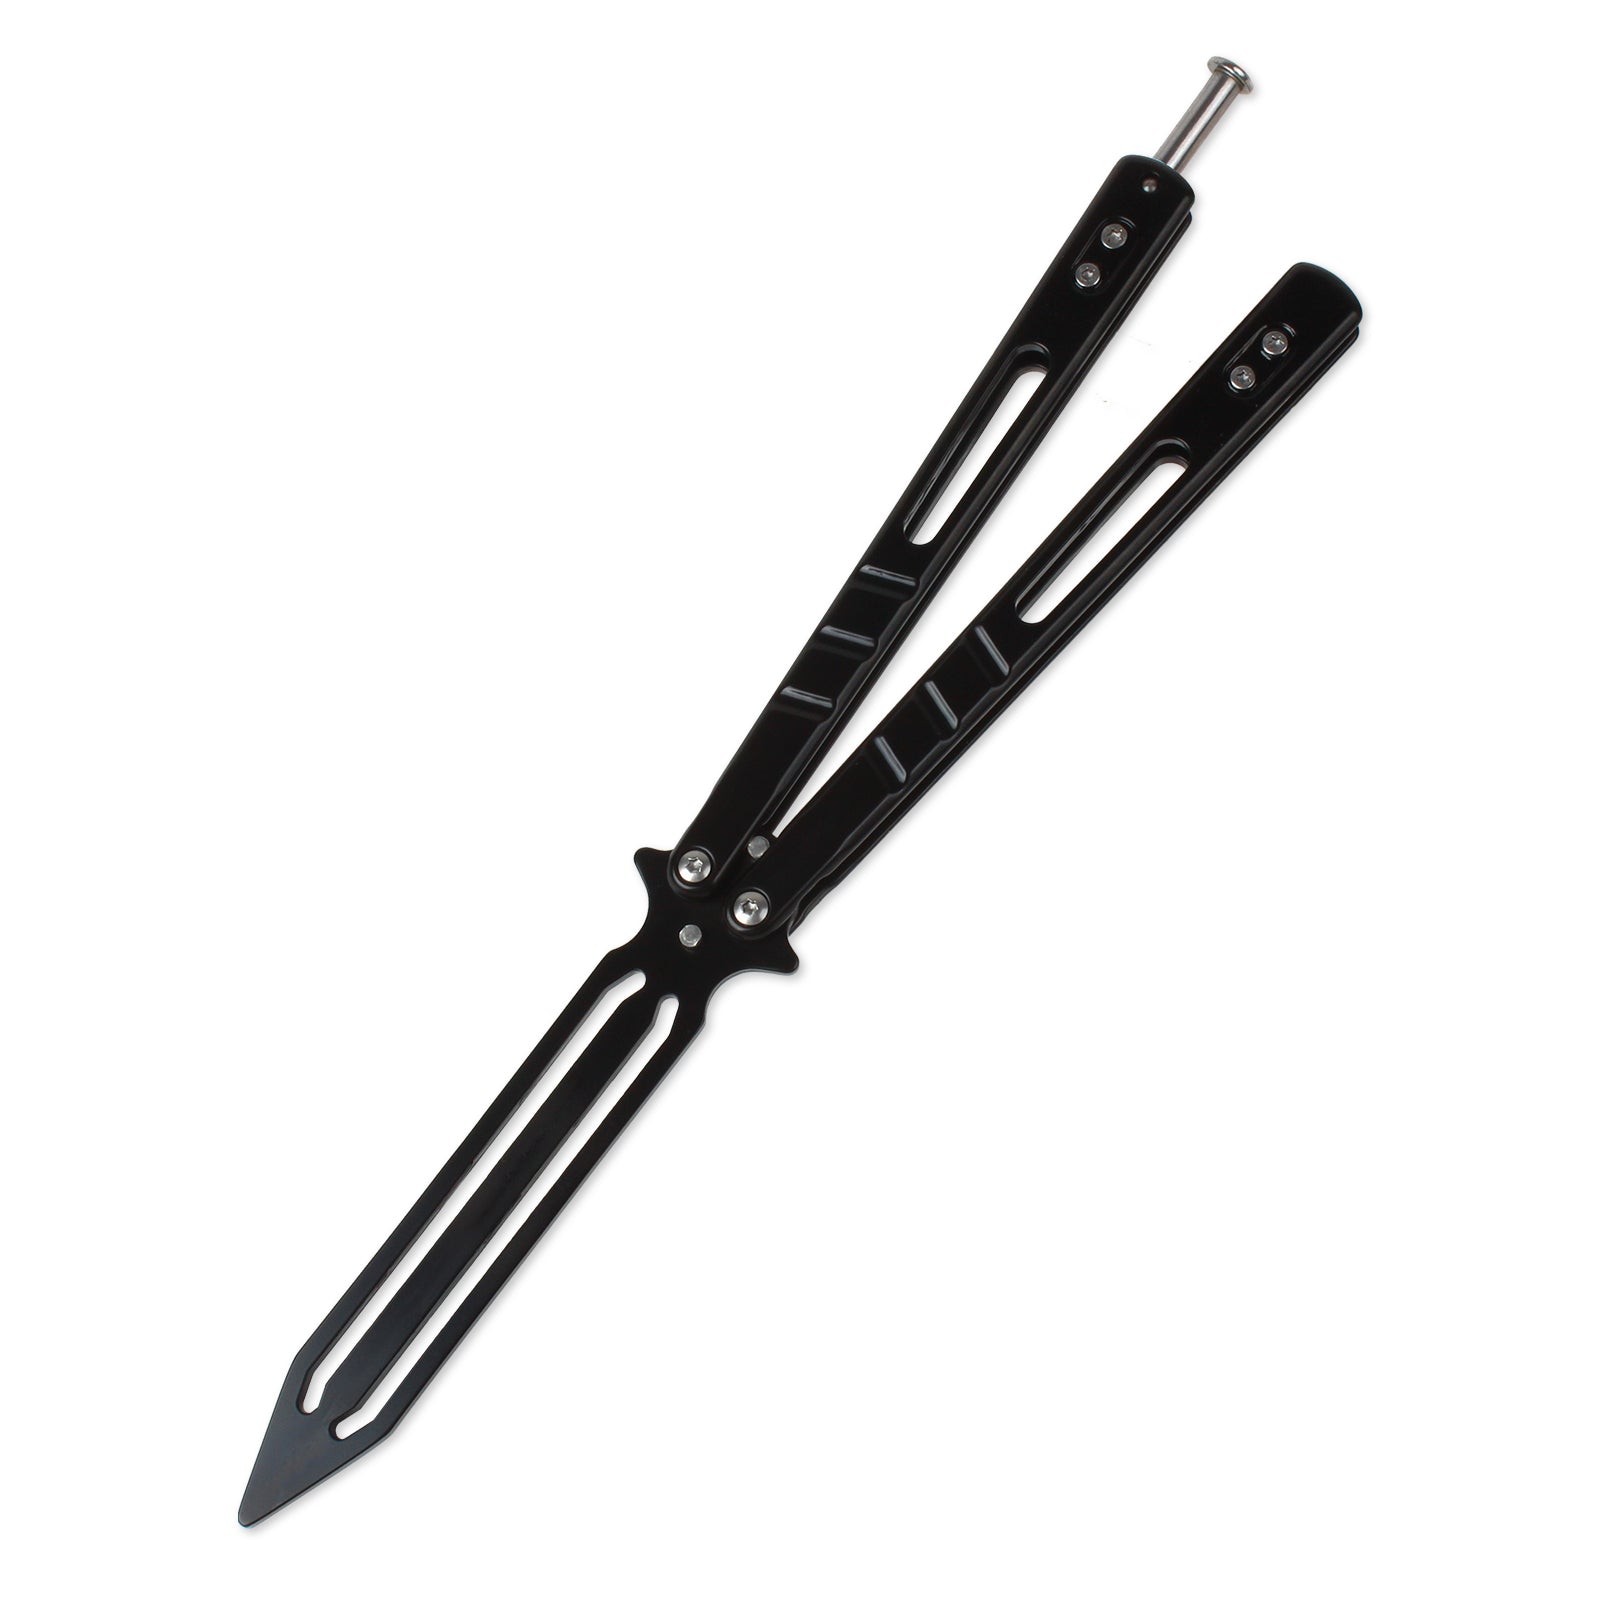 Andux Balisong Butterfly Knife Stainless Steel Outdoor Knives (Black) HDD41